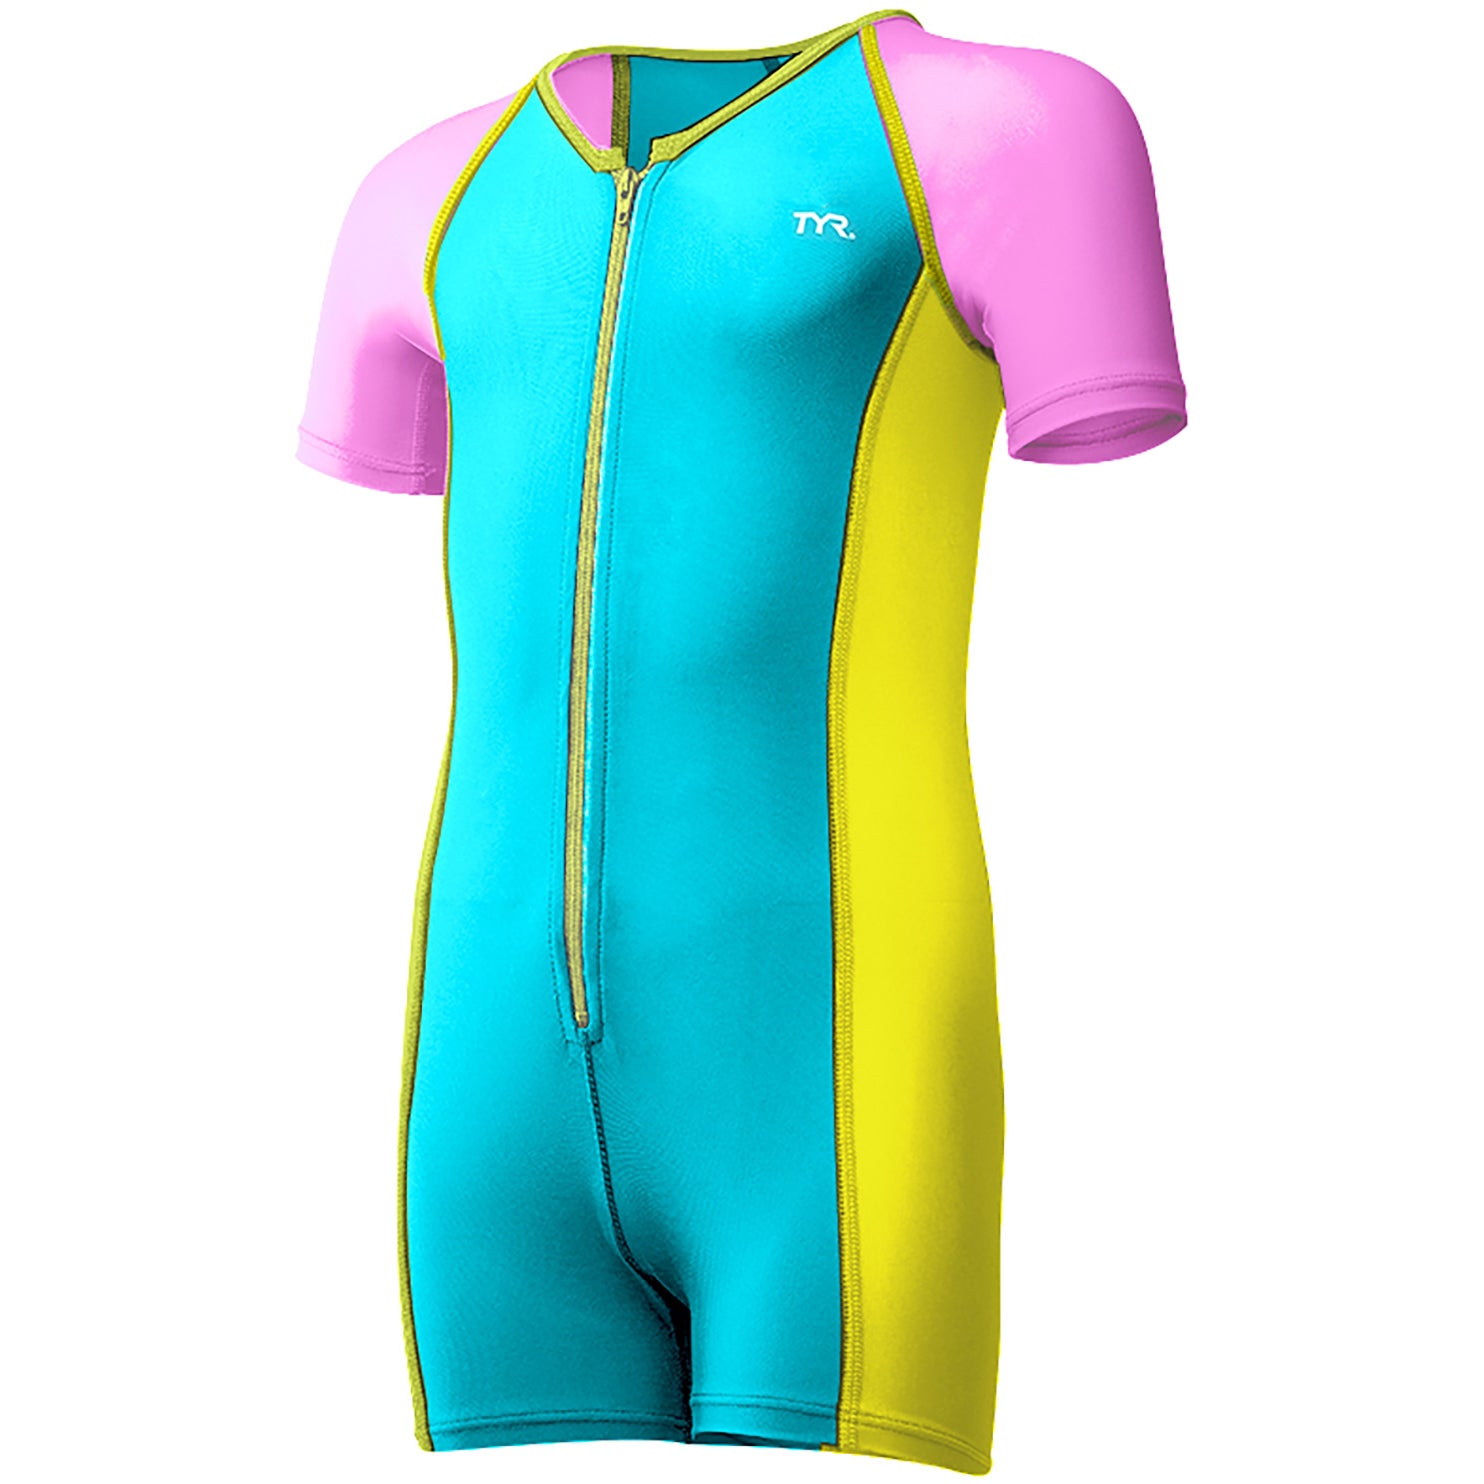 TYR Girls Solid Thermal Suit- Blue/Pink/Yellow